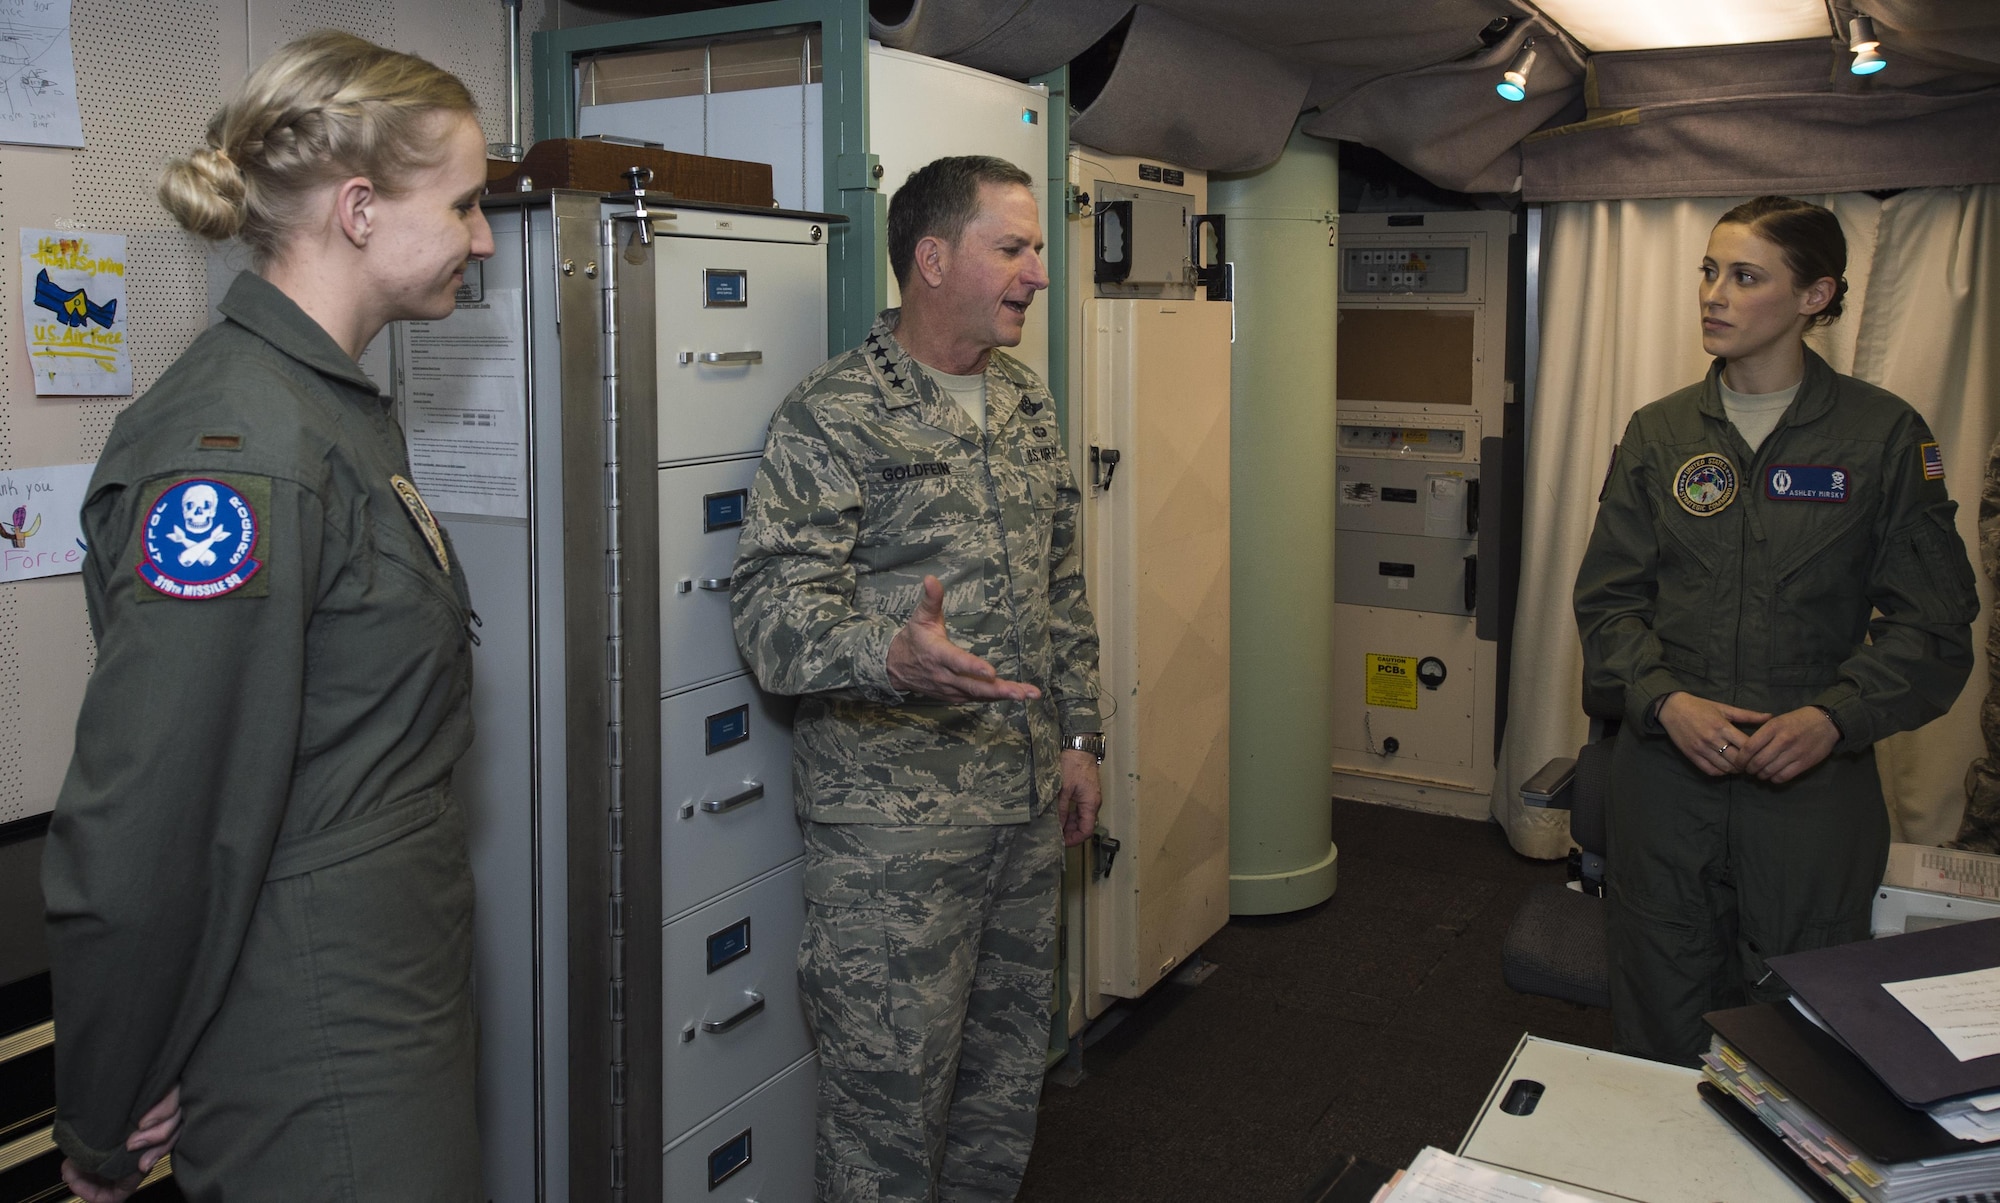 Air Force Chief of Staff Gen. David L. Goldfein receives a tour of the launch control center from 1st. Lt. Ashley Mirsky, 319th Missile Squadron missile combat crew commander, and 2nd Lt. Marie Blair, 319th MS deputy missile combat crew commander, during a familiarization tour at a missile alert facility in the 90th Missile Wing missile complex, Dec. 19, 2016.  When directed by the U.S. President, a properly conducted key turn sends a "launch vote" to any number of Minuteman III ICBMs in a missileer's squadron. Two different launch votes are required to enable a launch. (U.S. Air Force photo by Staff Sgt. Christopher Ruano)